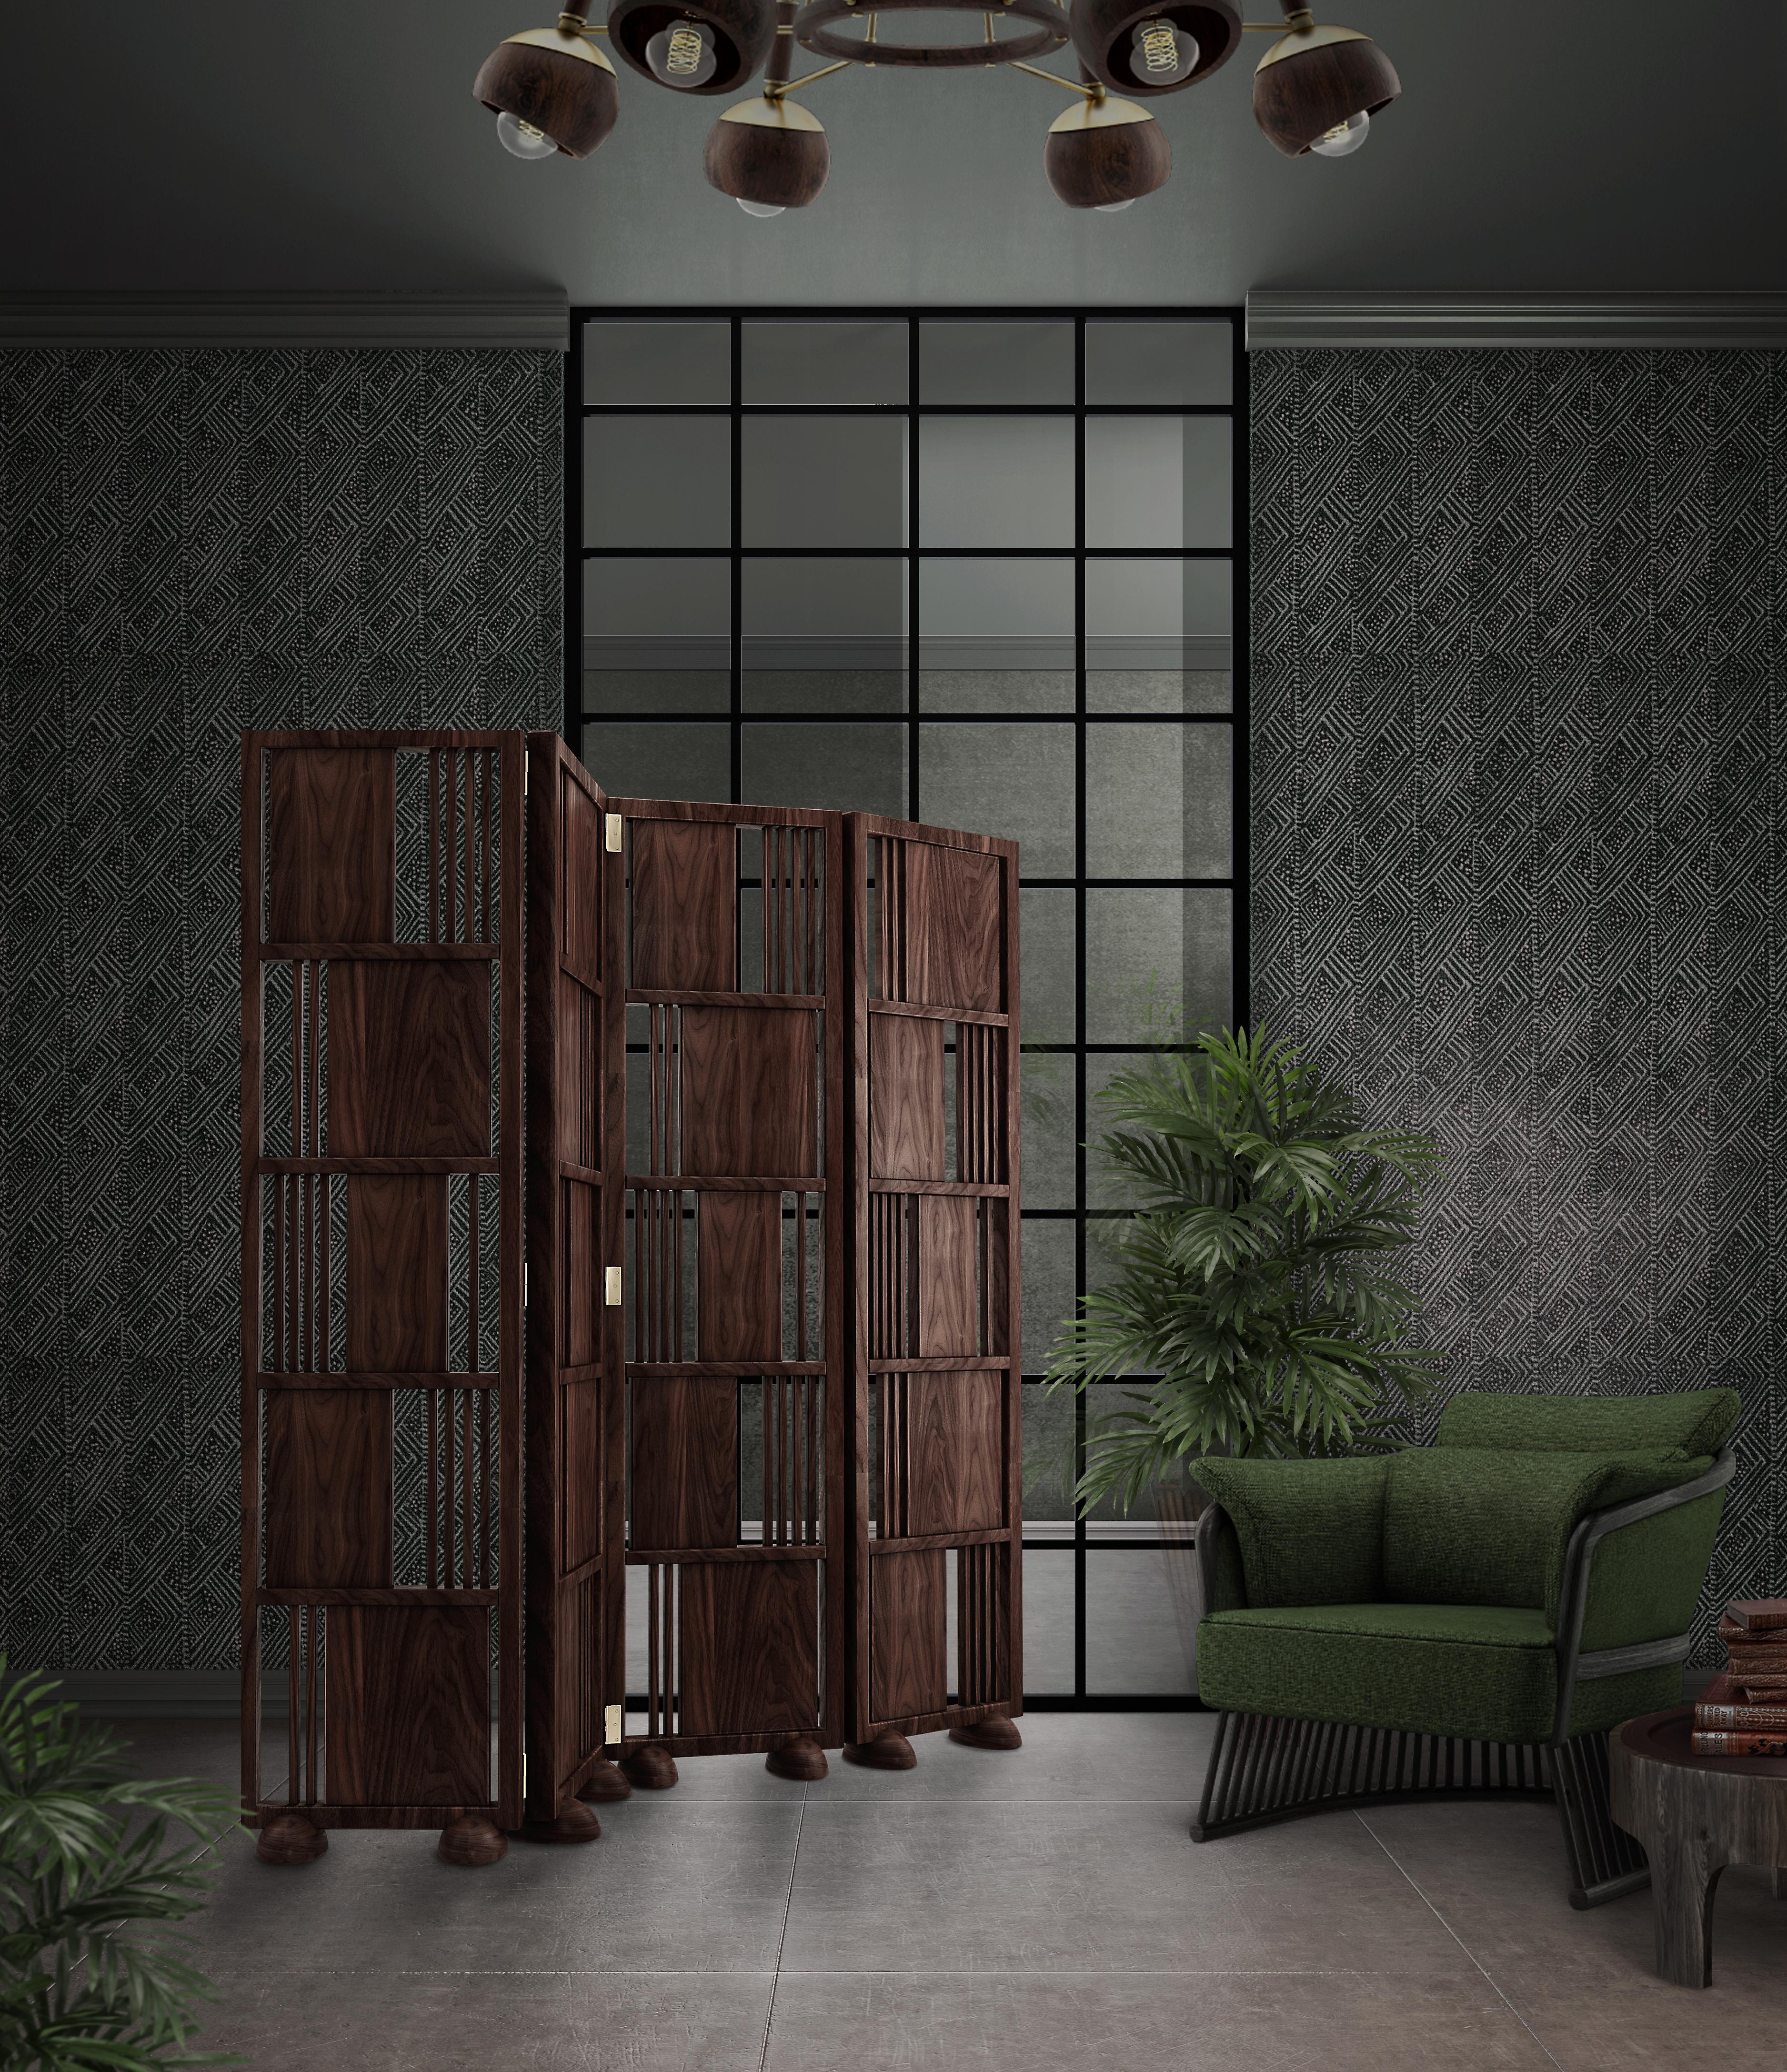 Entering a gentlemen’s club leads into a world of privilege and status, enriched with pieces like Wordsworth Bookcase and the Folding Screen. Inspired by William Wordsworth, a poet who helped found the Romantic movement in English Literature,